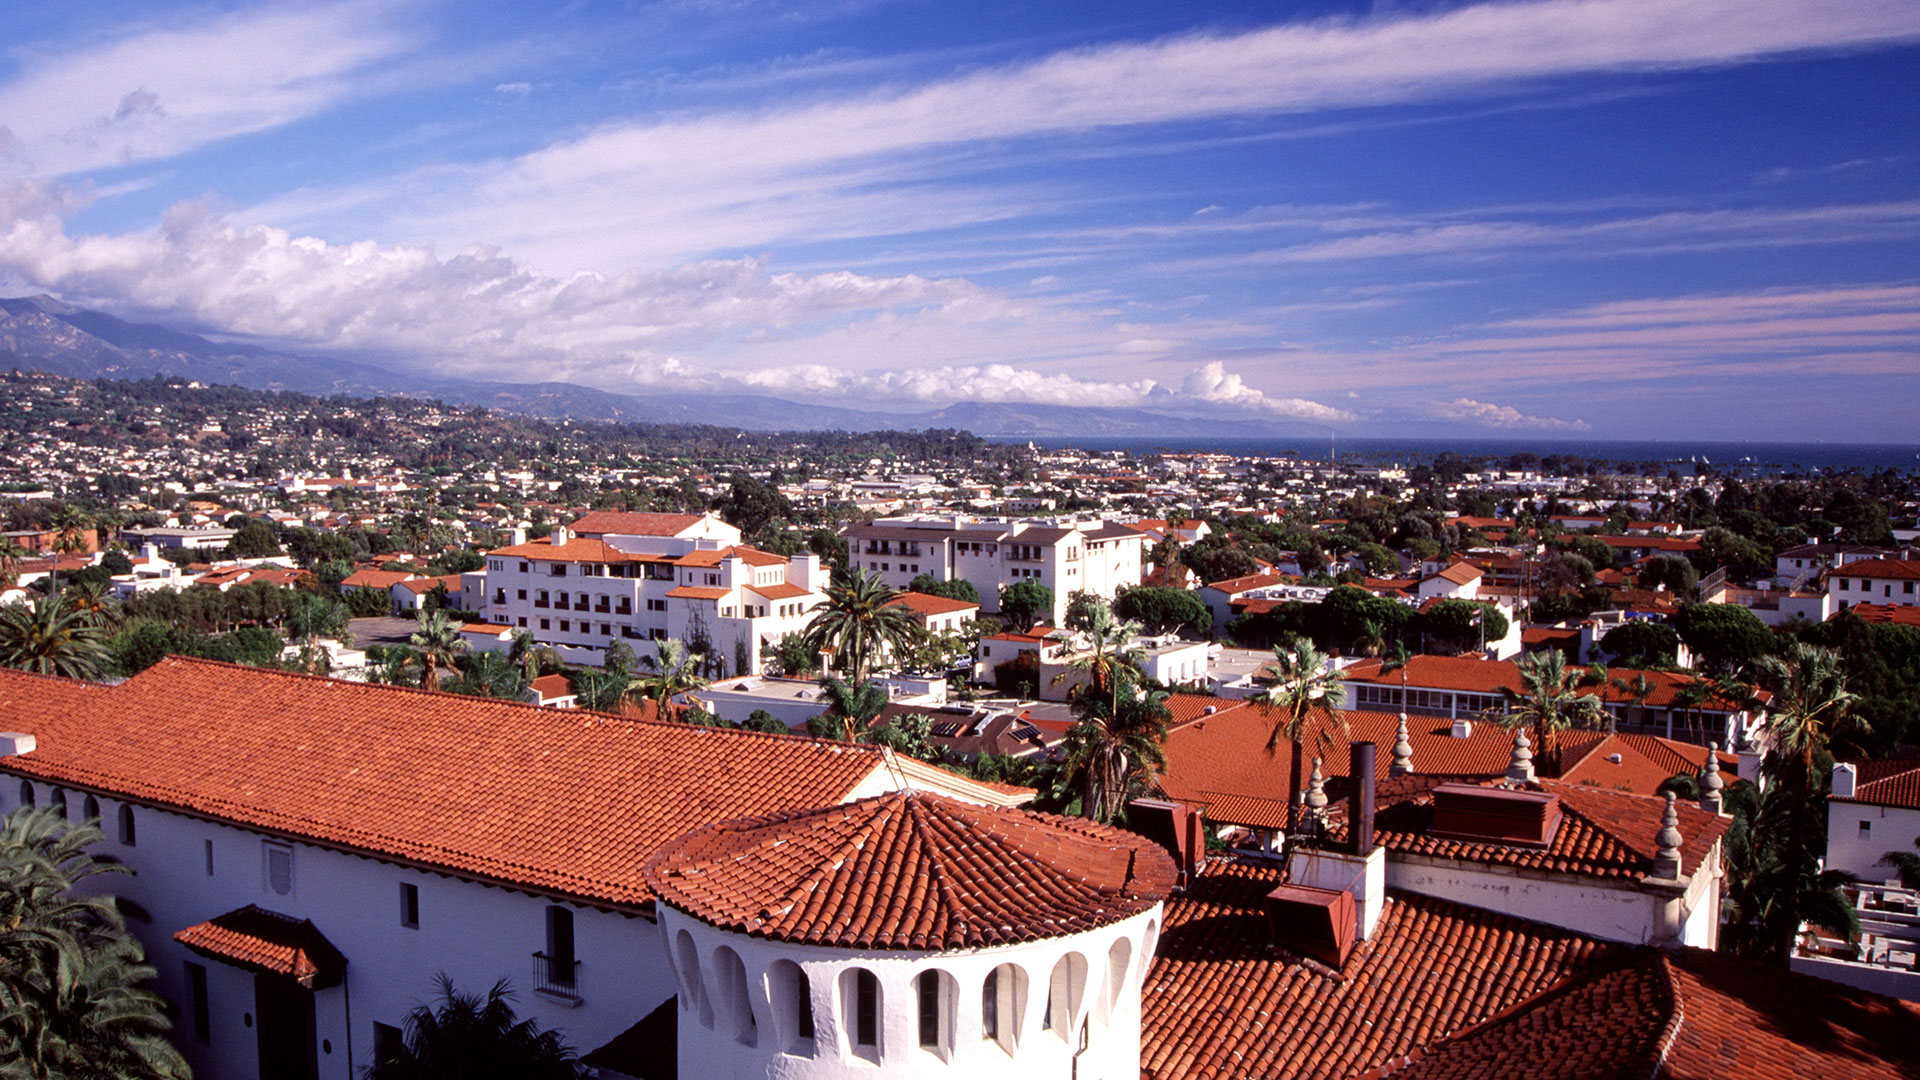 View of red tile rooftops, mountains and blue sky in Santa Barbara